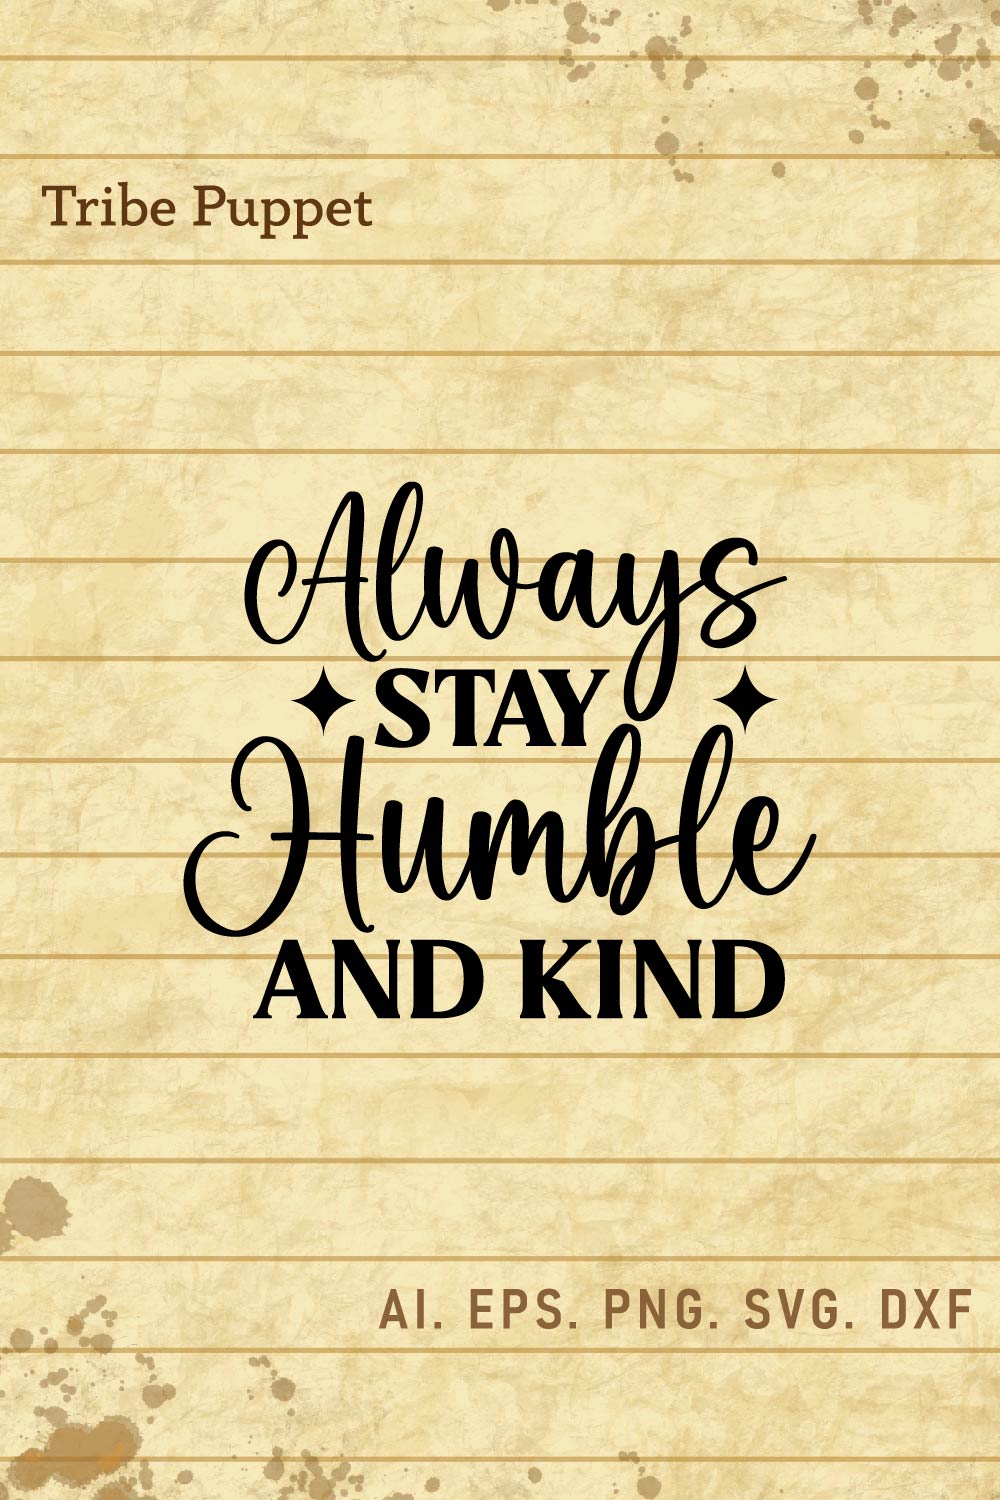 Kindness Quotes pinterest preview image.